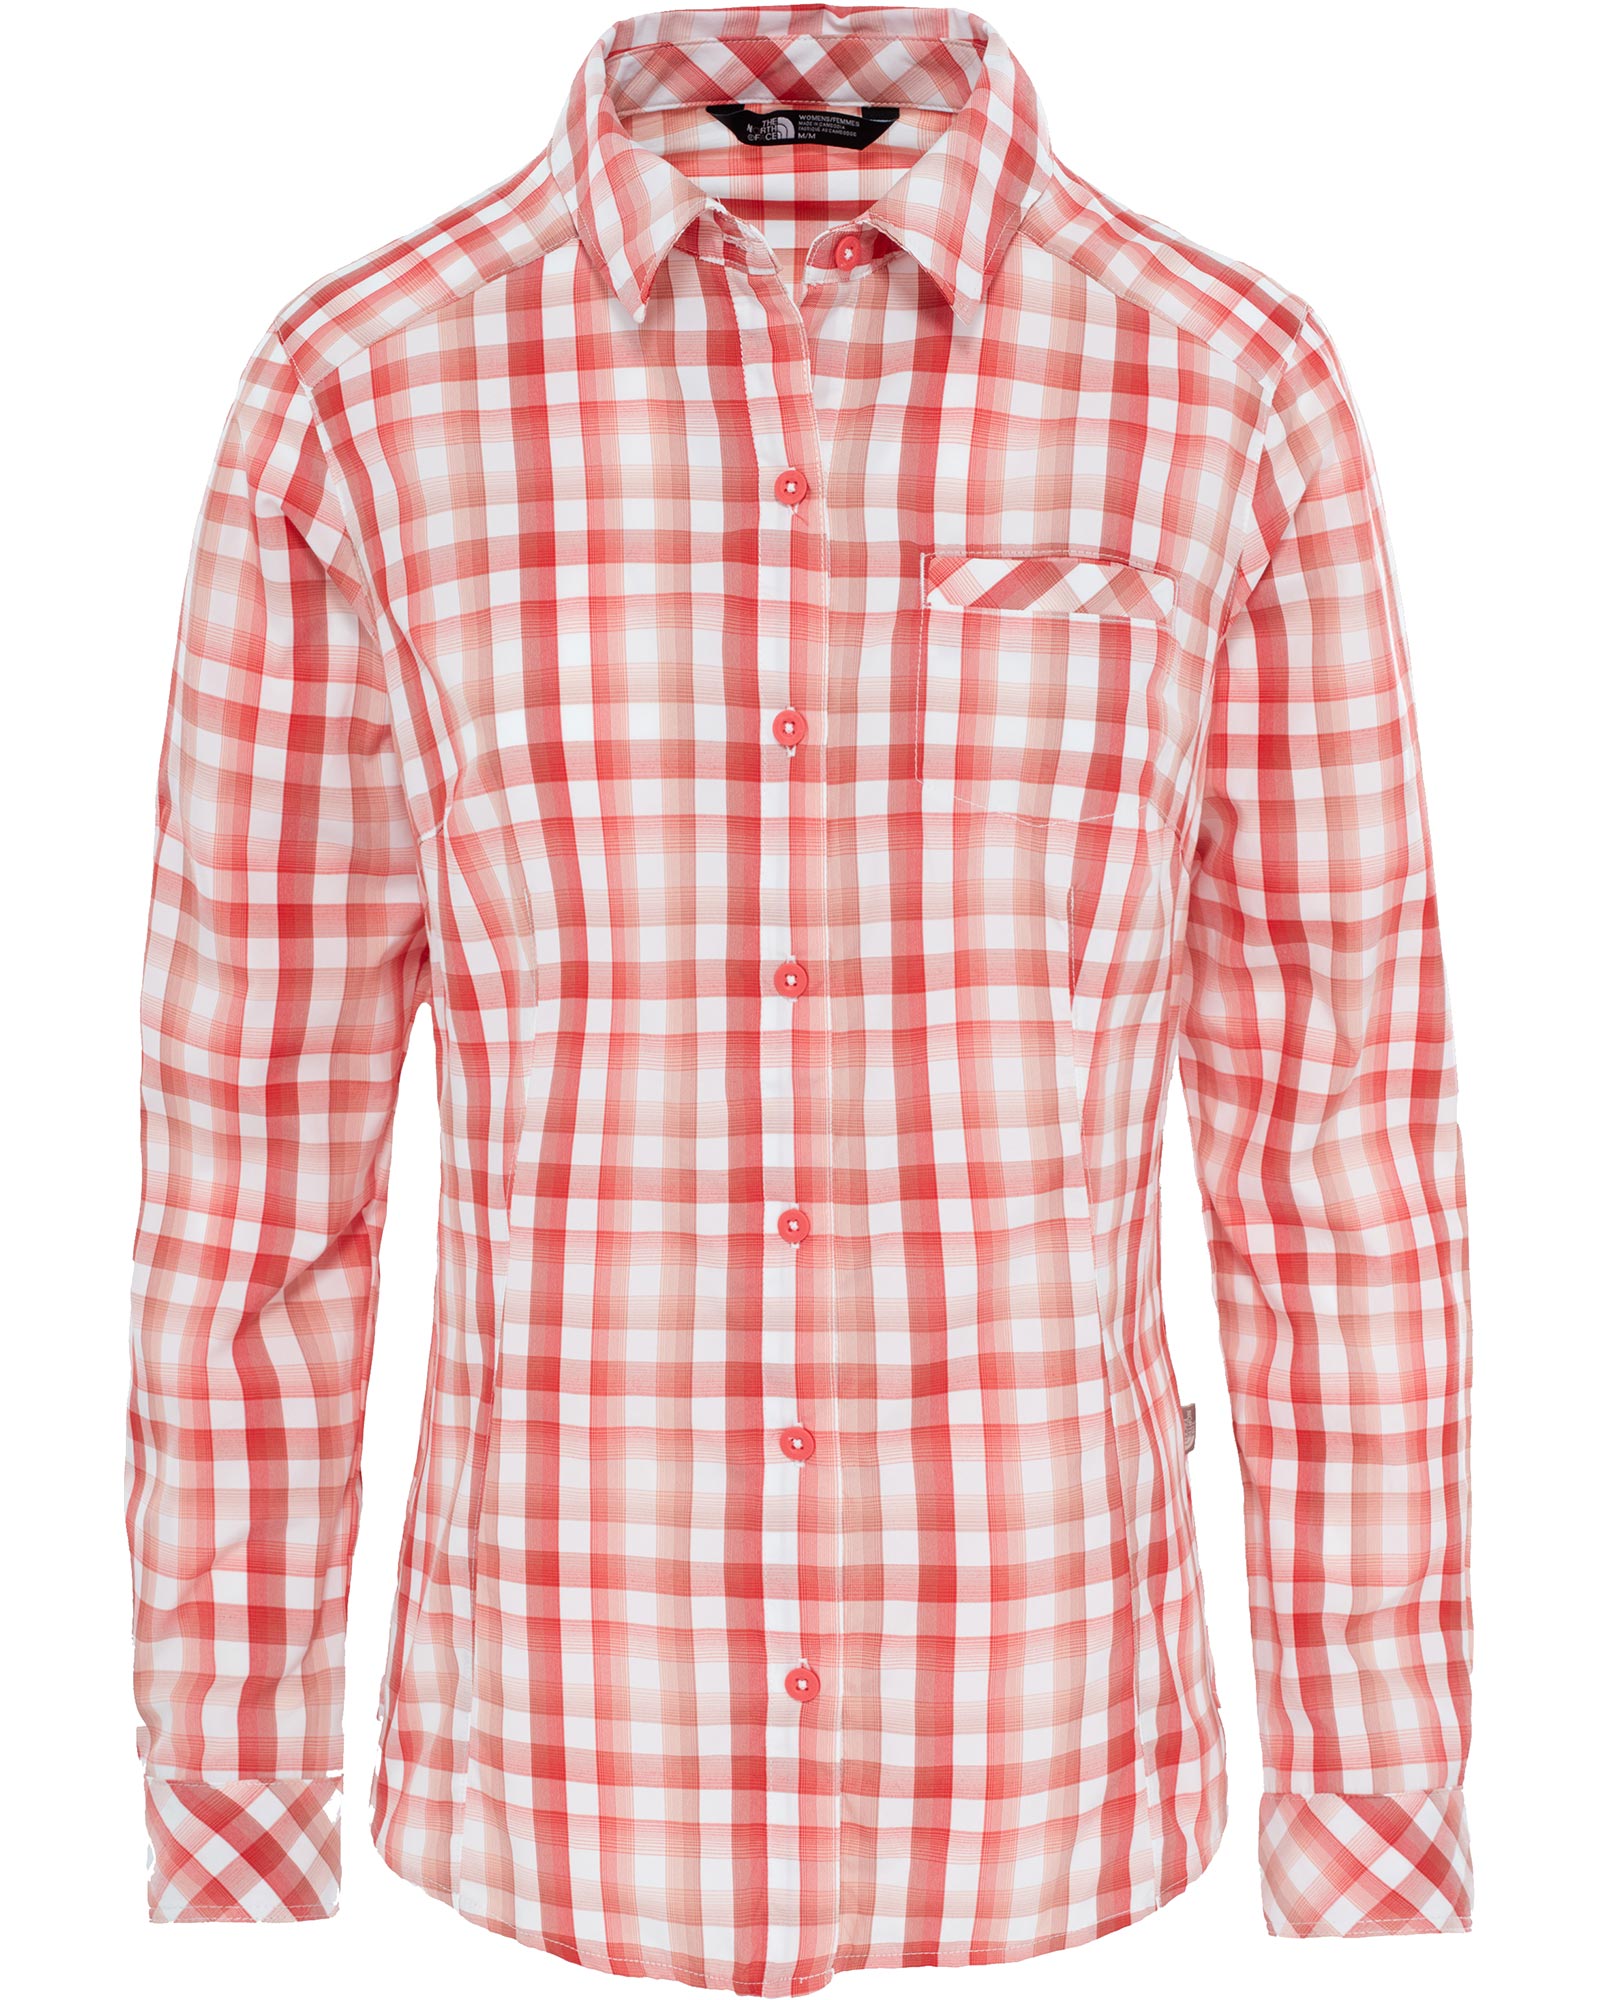 The North Face Zion Women’s Long Sleeve Shirt - Cayenne Red Plaid S